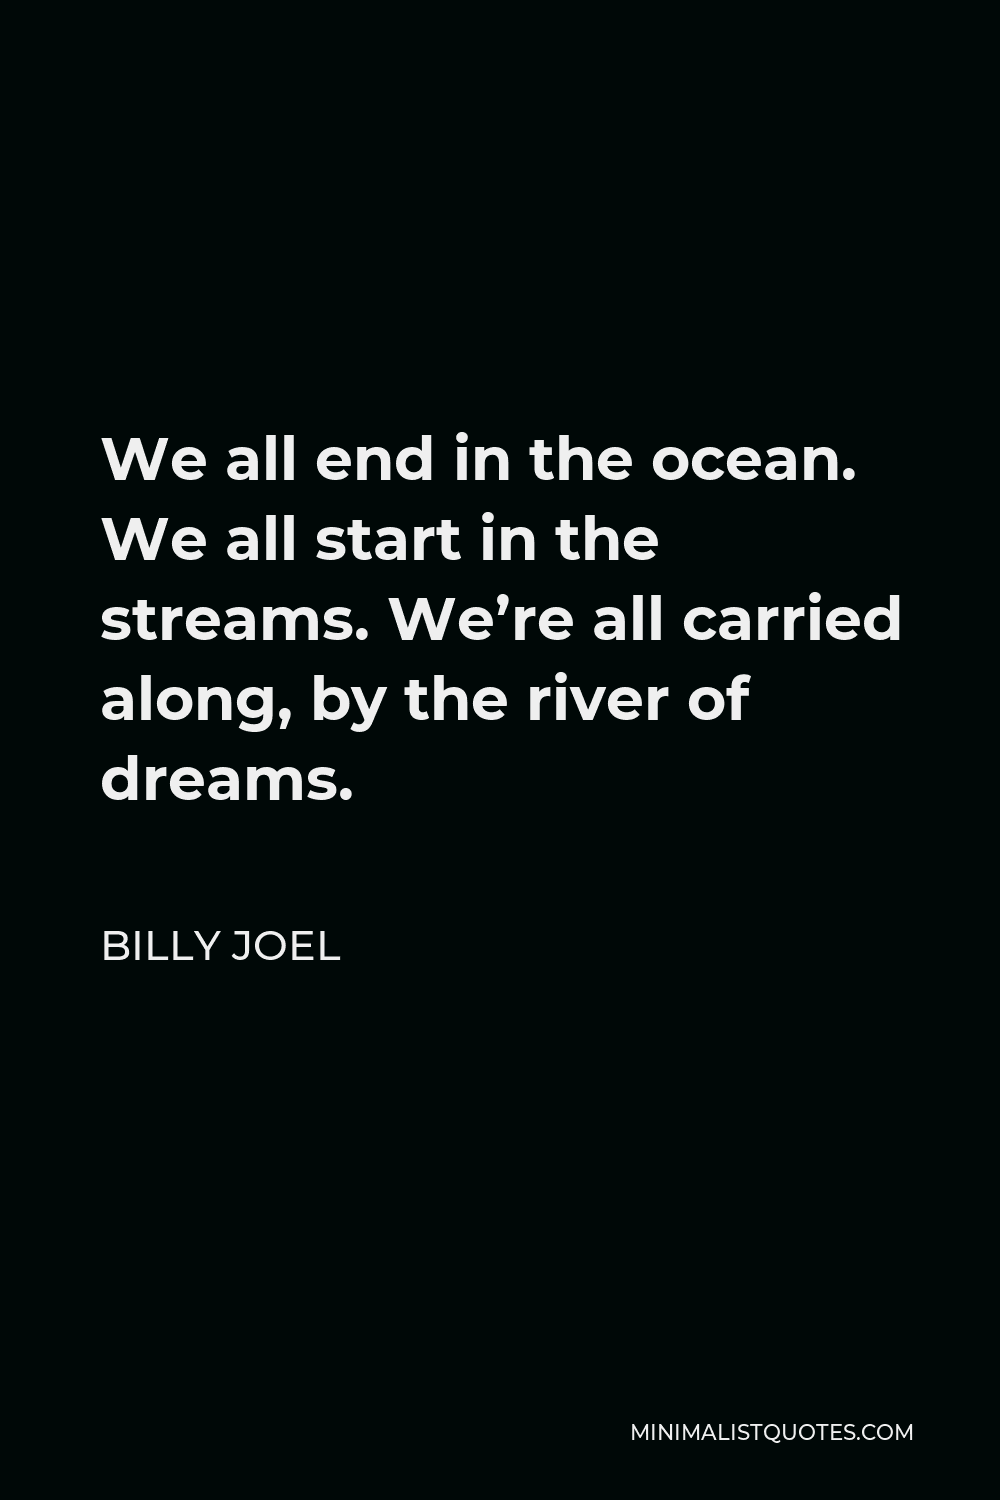 Billy Joel Quote - We all end in the ocean. We all start in the streams. We’re all carried along, by the river of dreams.